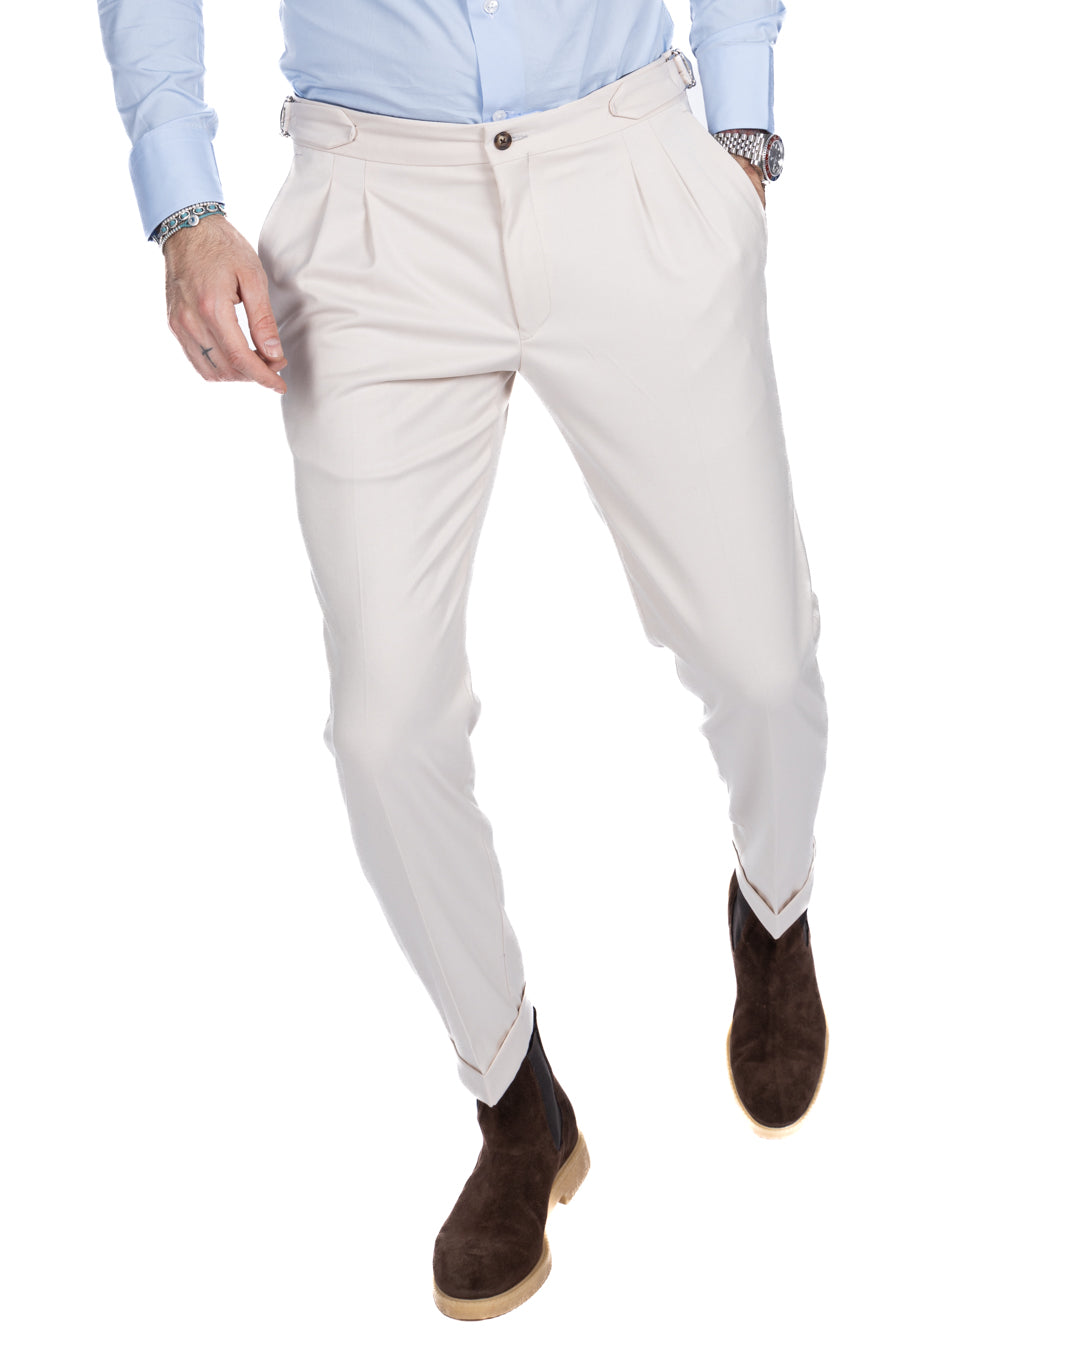 Otranto - cream trousers with buckles and pleats